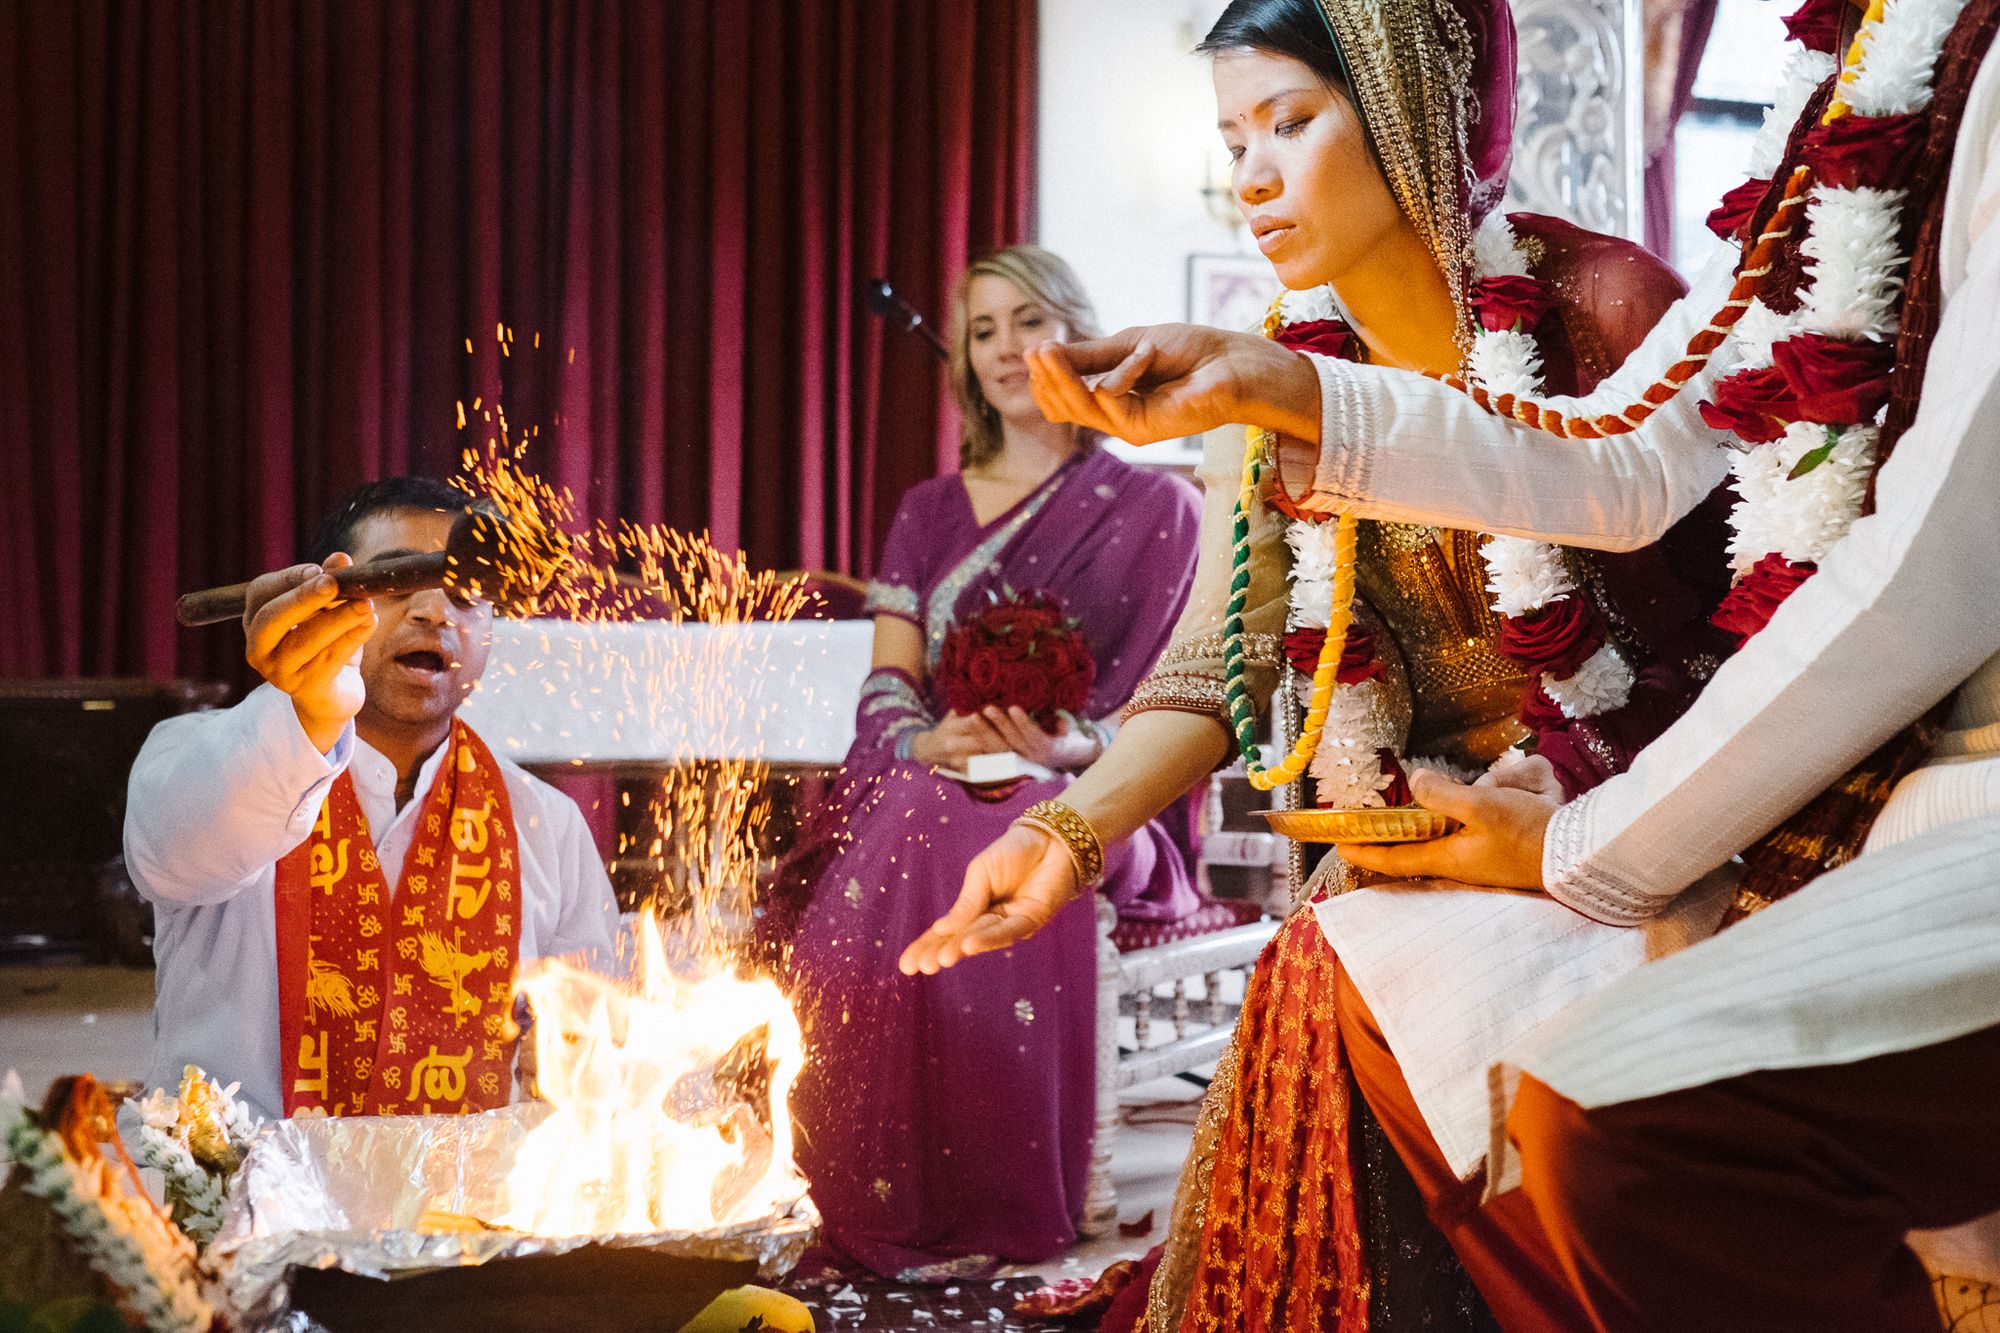 Hindu ceremony at a Chinese and Indian fusion wedding in London